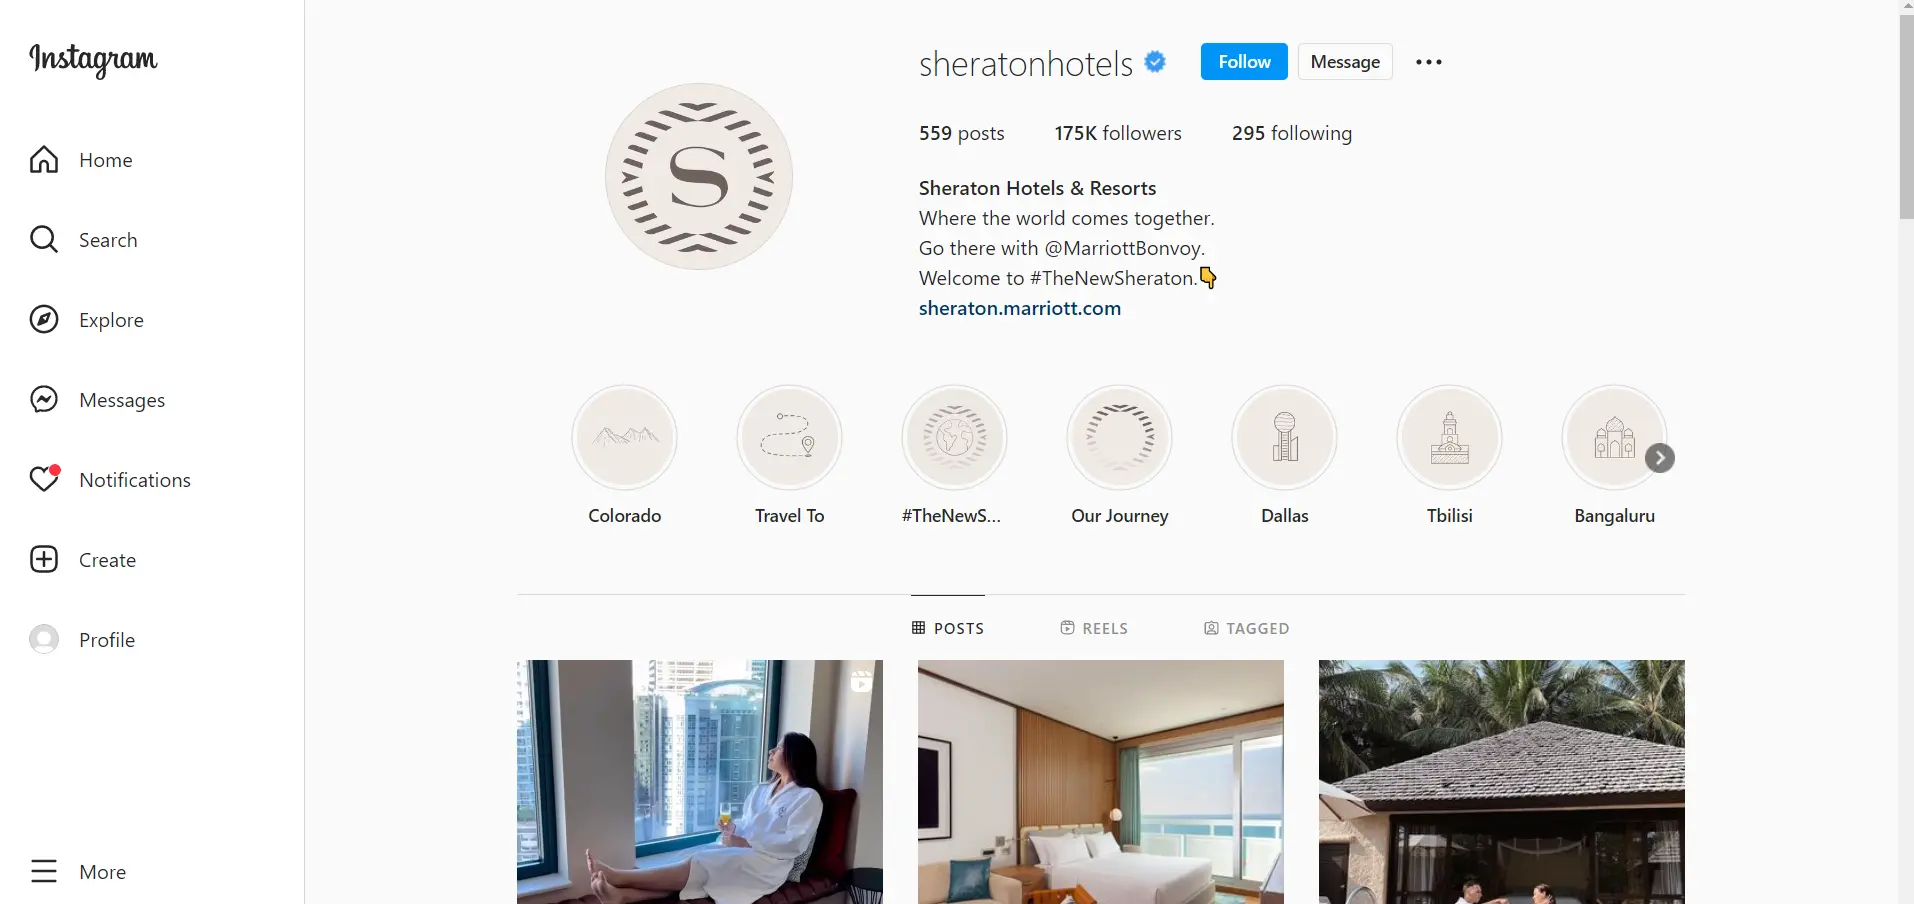 Sheraton Hotels Instagram Page